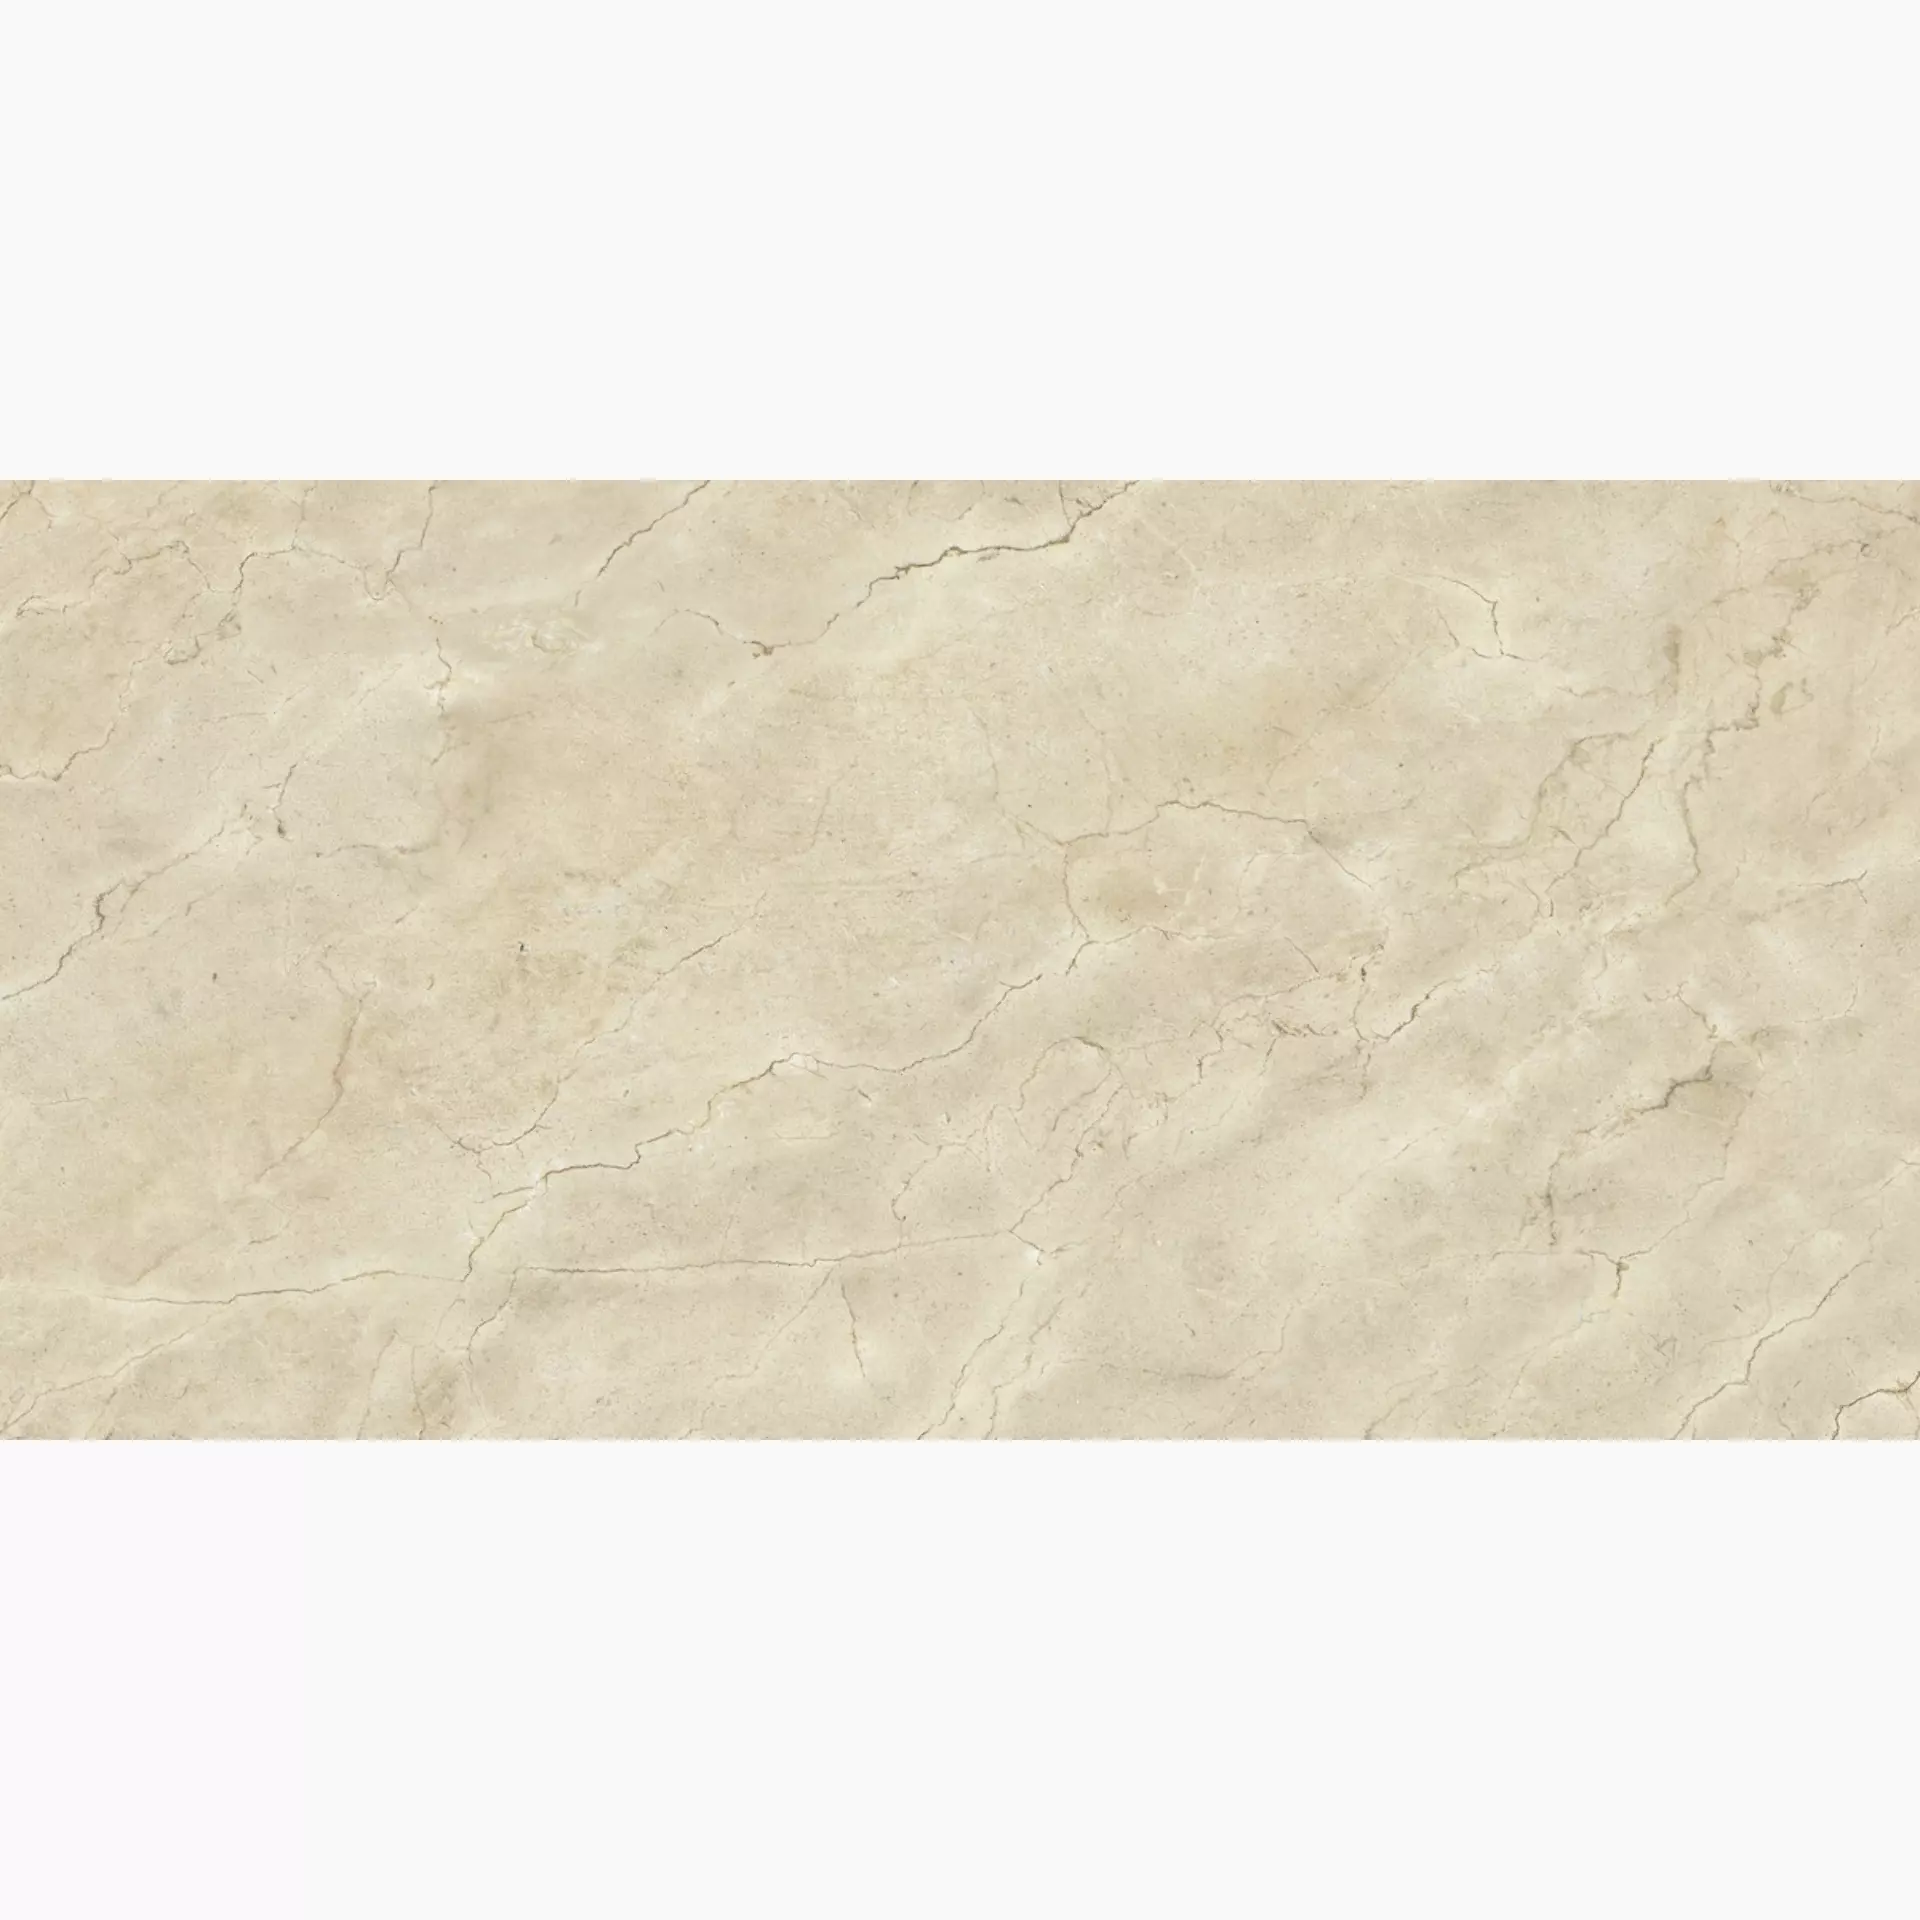 FMG Marmi Select Crema Marfil Extra Naturale P628392 60x120cm rectified 8mm